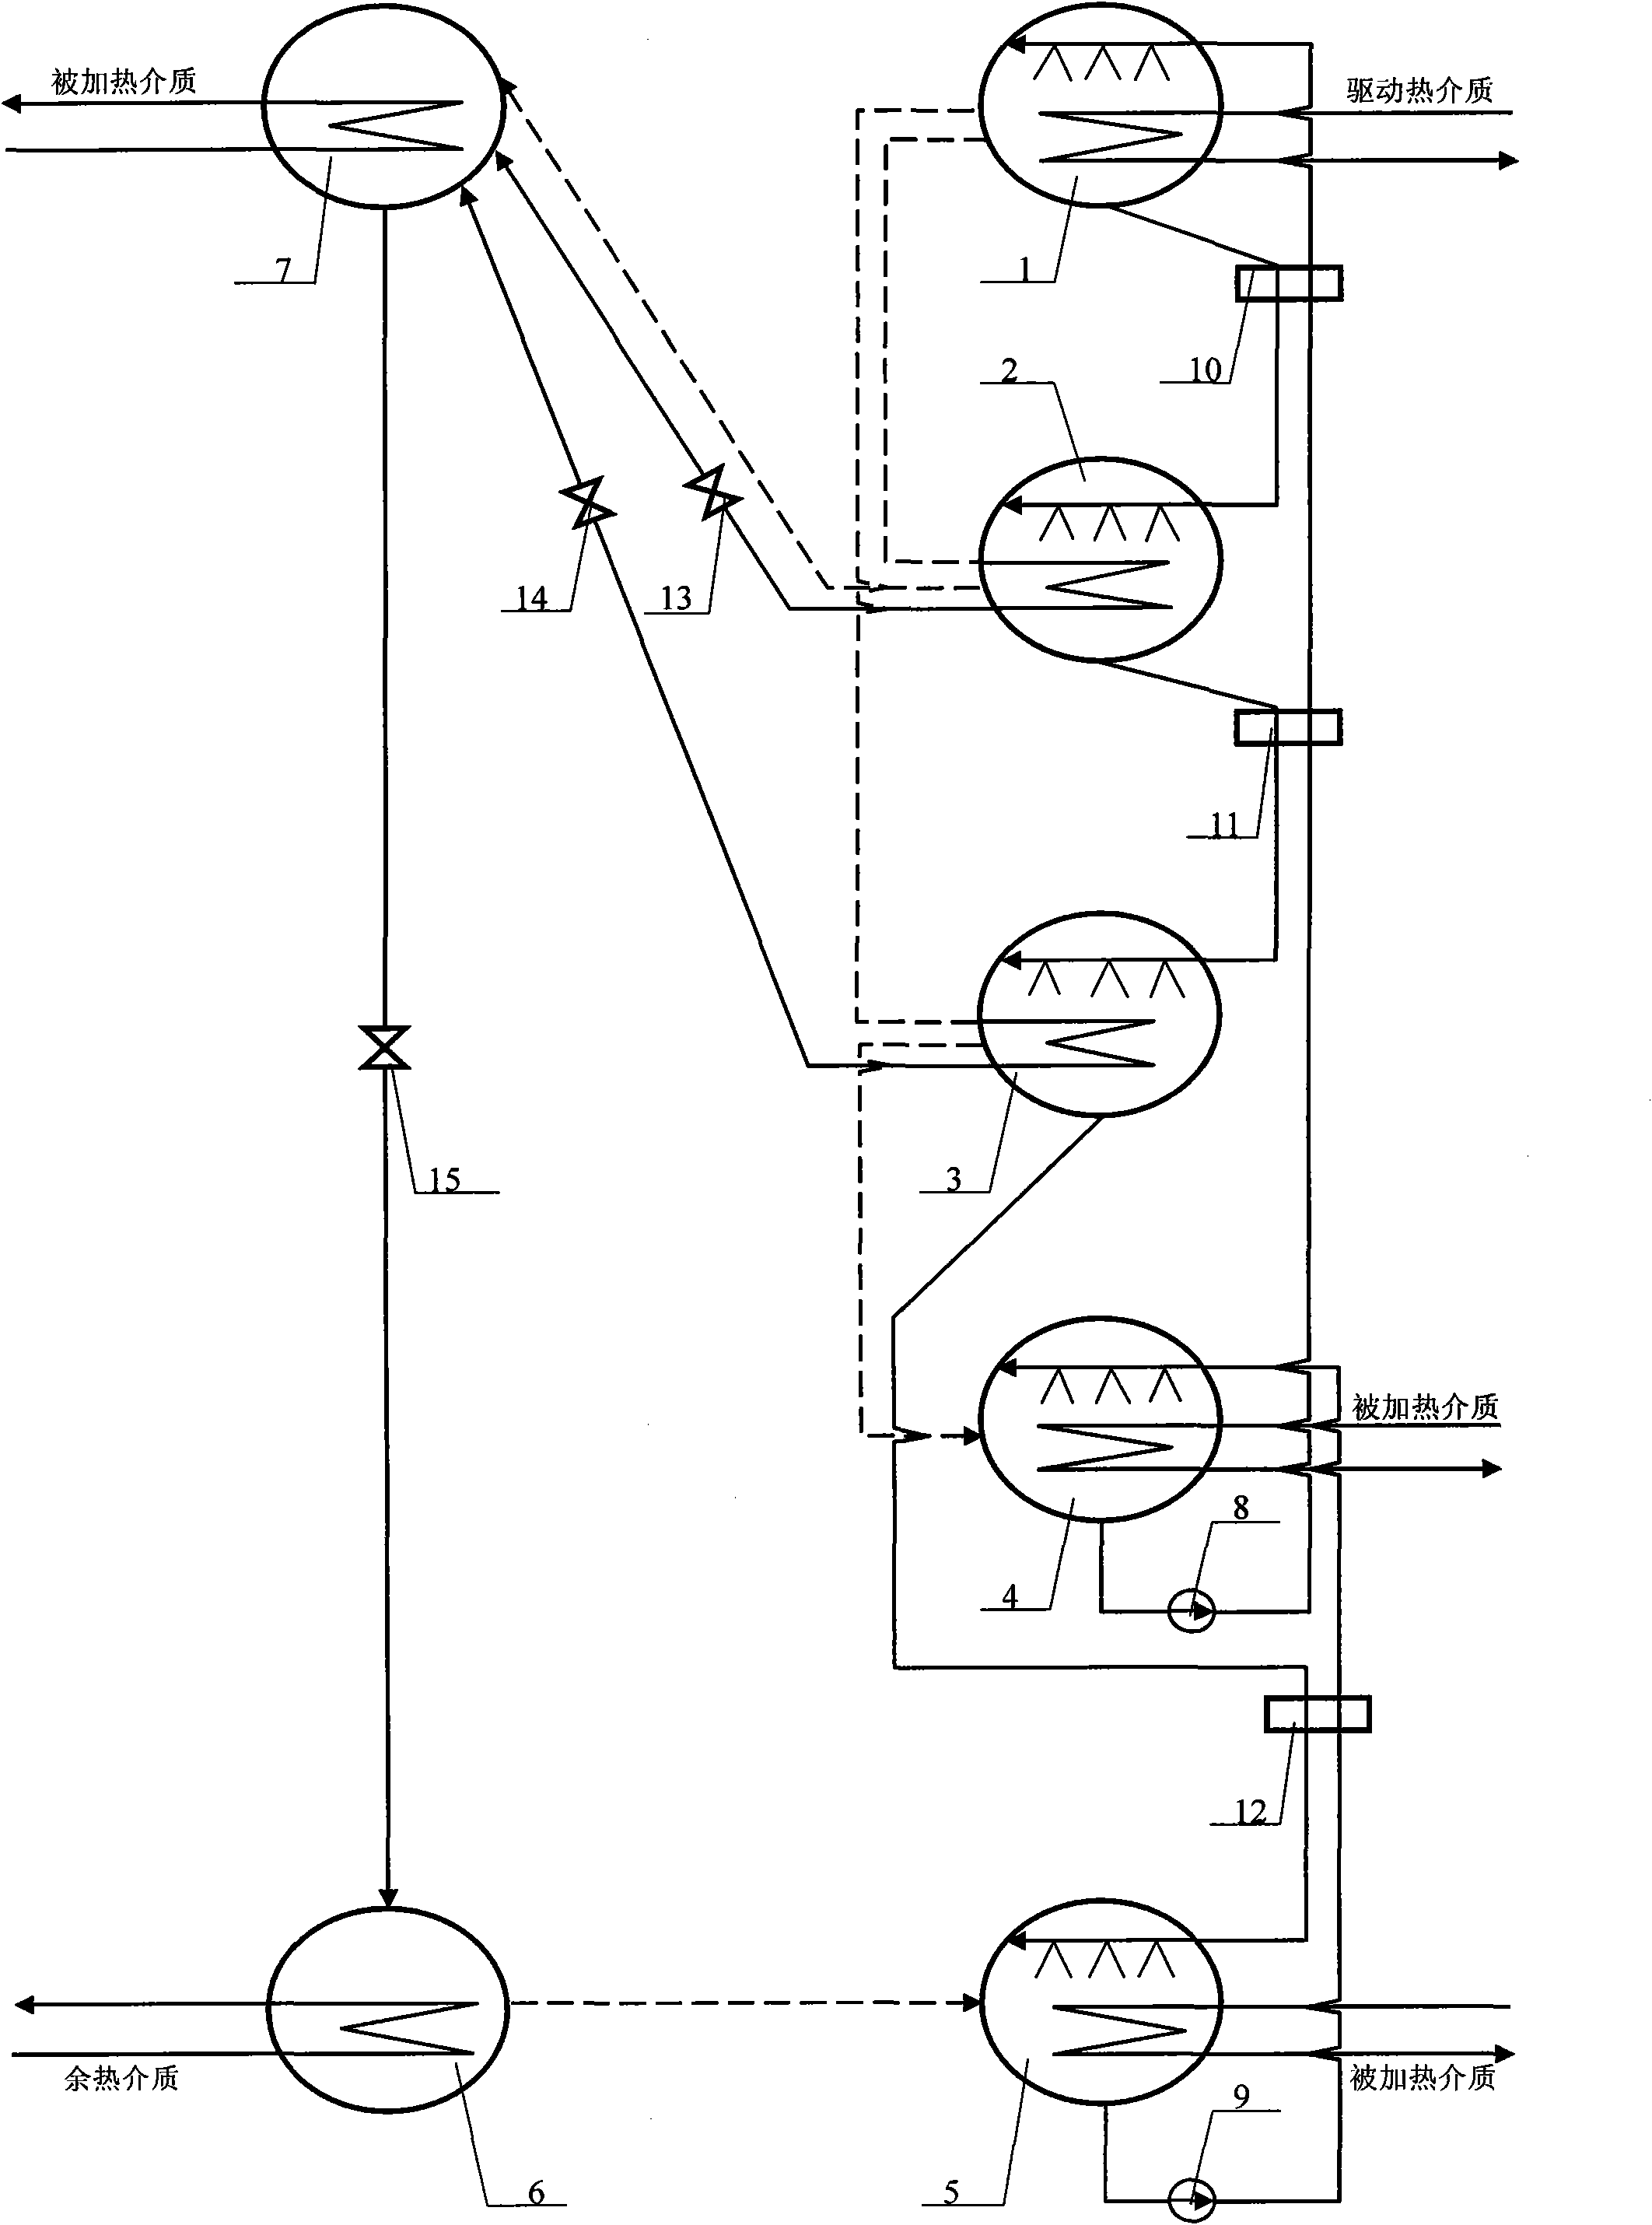 Double-effect and triple-effect first-type absorption heat pump with heat return end and heat supply end